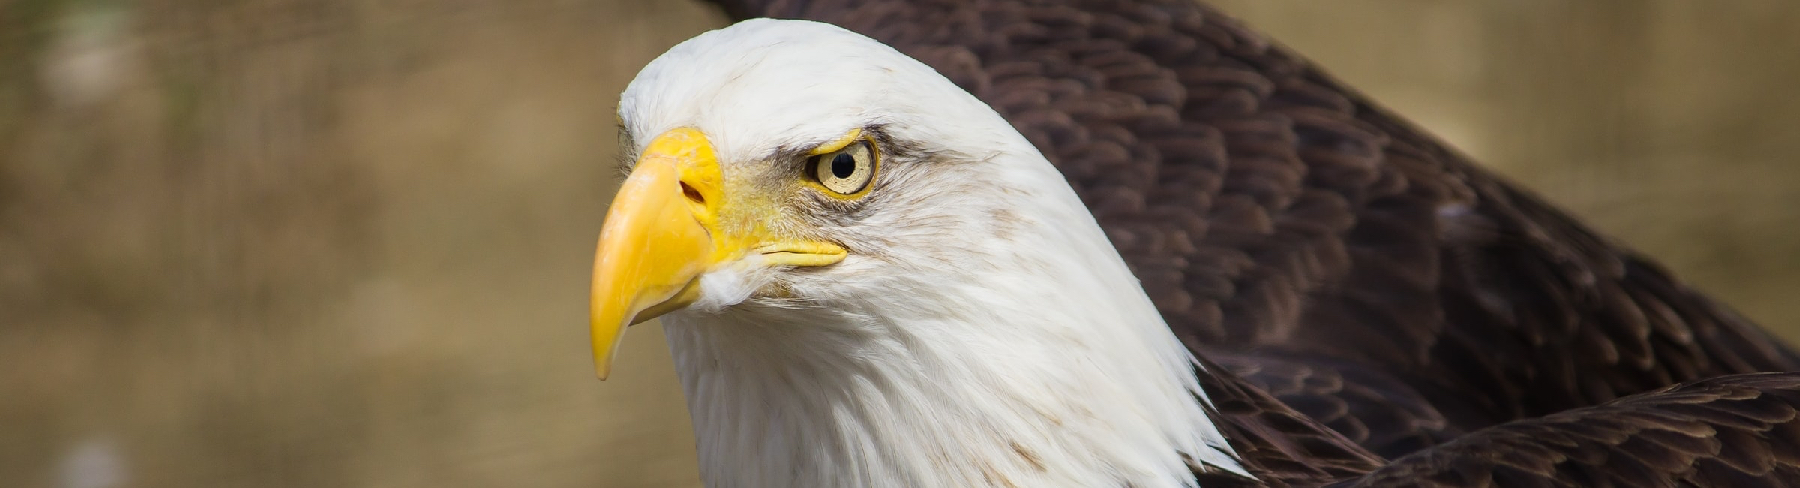 Face of an eagle